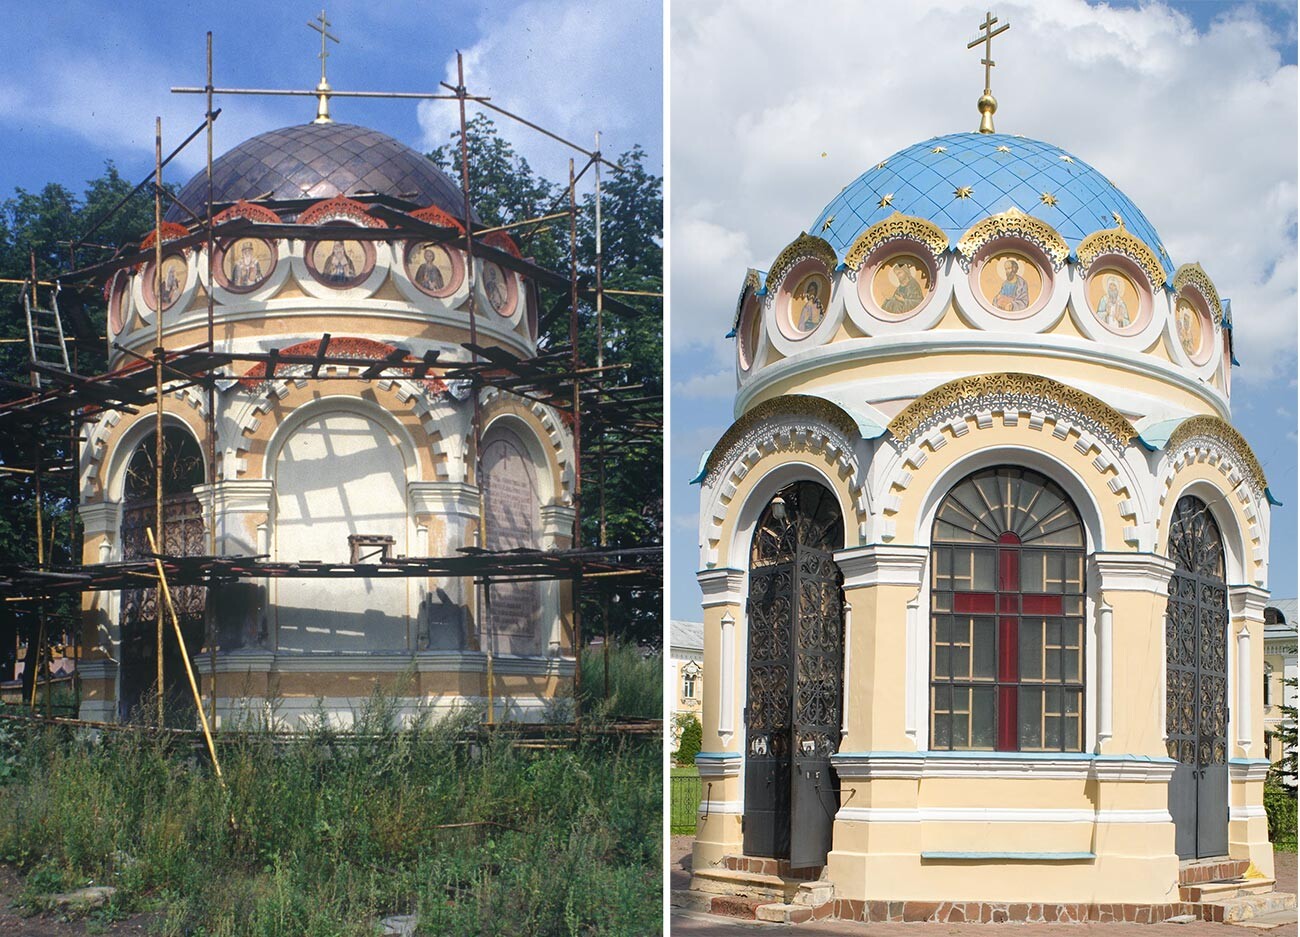 Left: St. Nicholas-Ugreshky Monastery. Chapel of Appearance of Icon of St. Nicholas (under restoration), southeast view. August 4, 1996. Right: Chapel of Appearance of Icon of St. Nicholas, southeast view. July 10, 2013